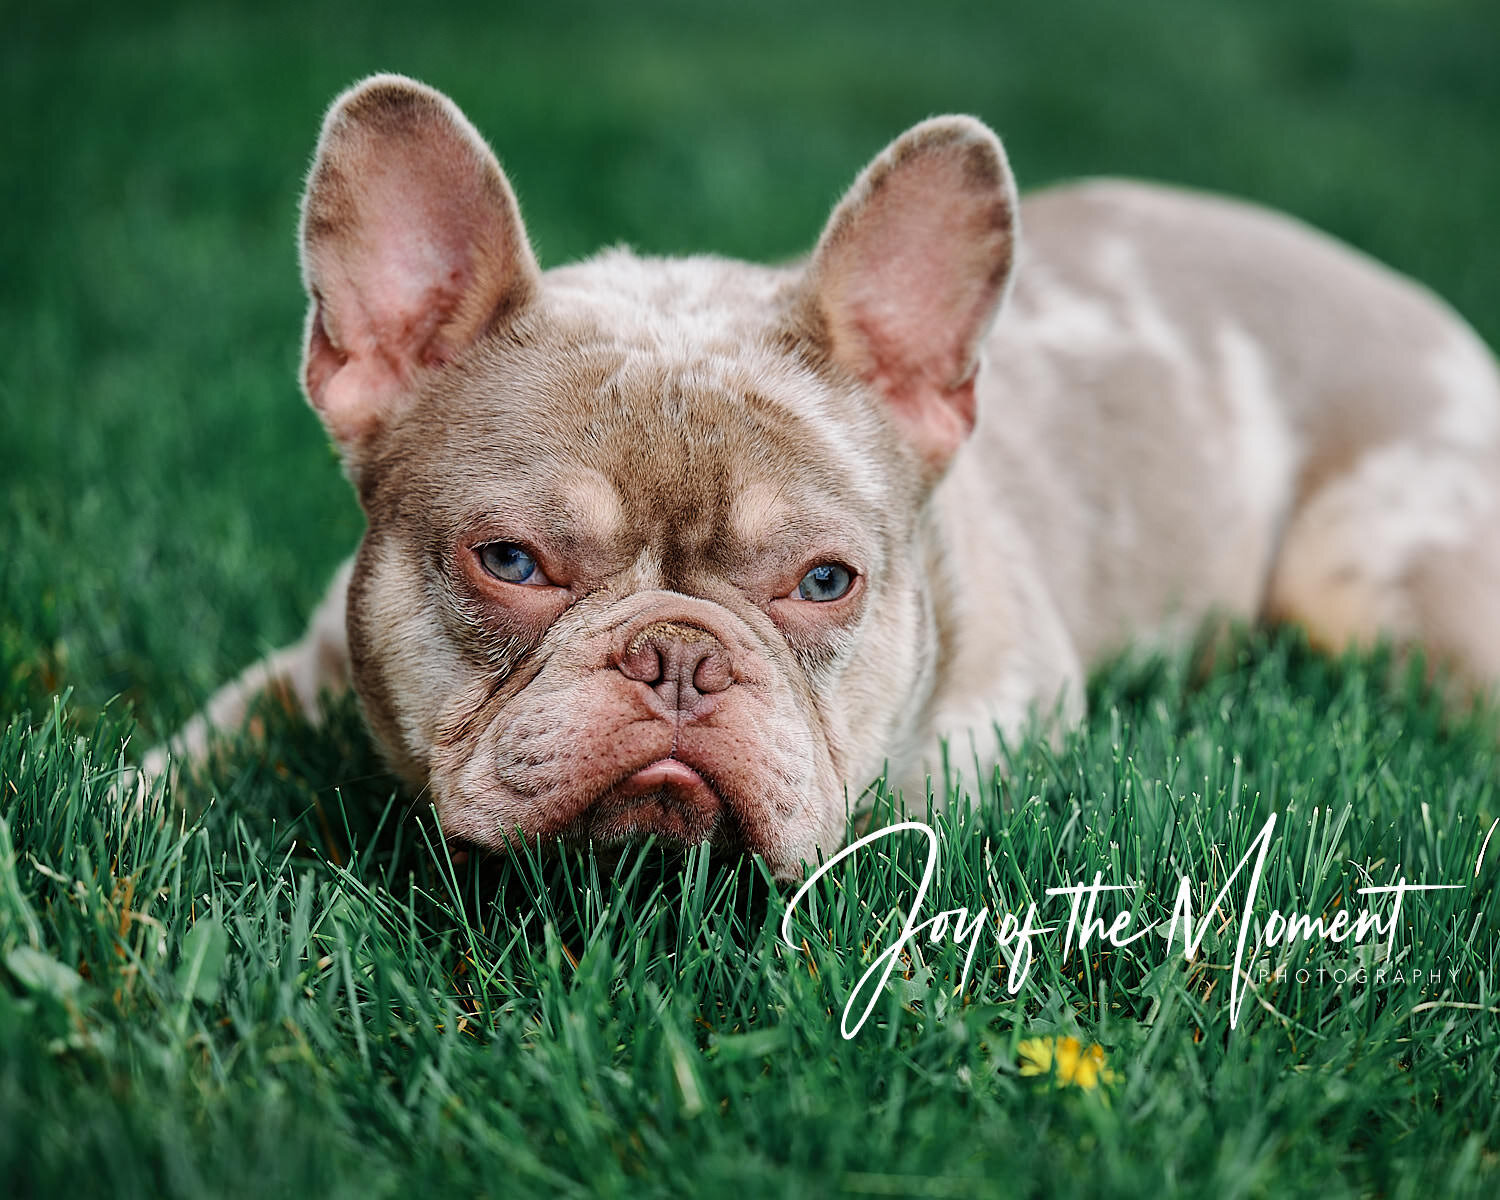  Portraits of Aces Wild, a French bulldog. What a sweet cutie to spend an hour with, so friendly and kind! His breeder Alonna Fisher wanted images of this purebred stud for her kennels website 